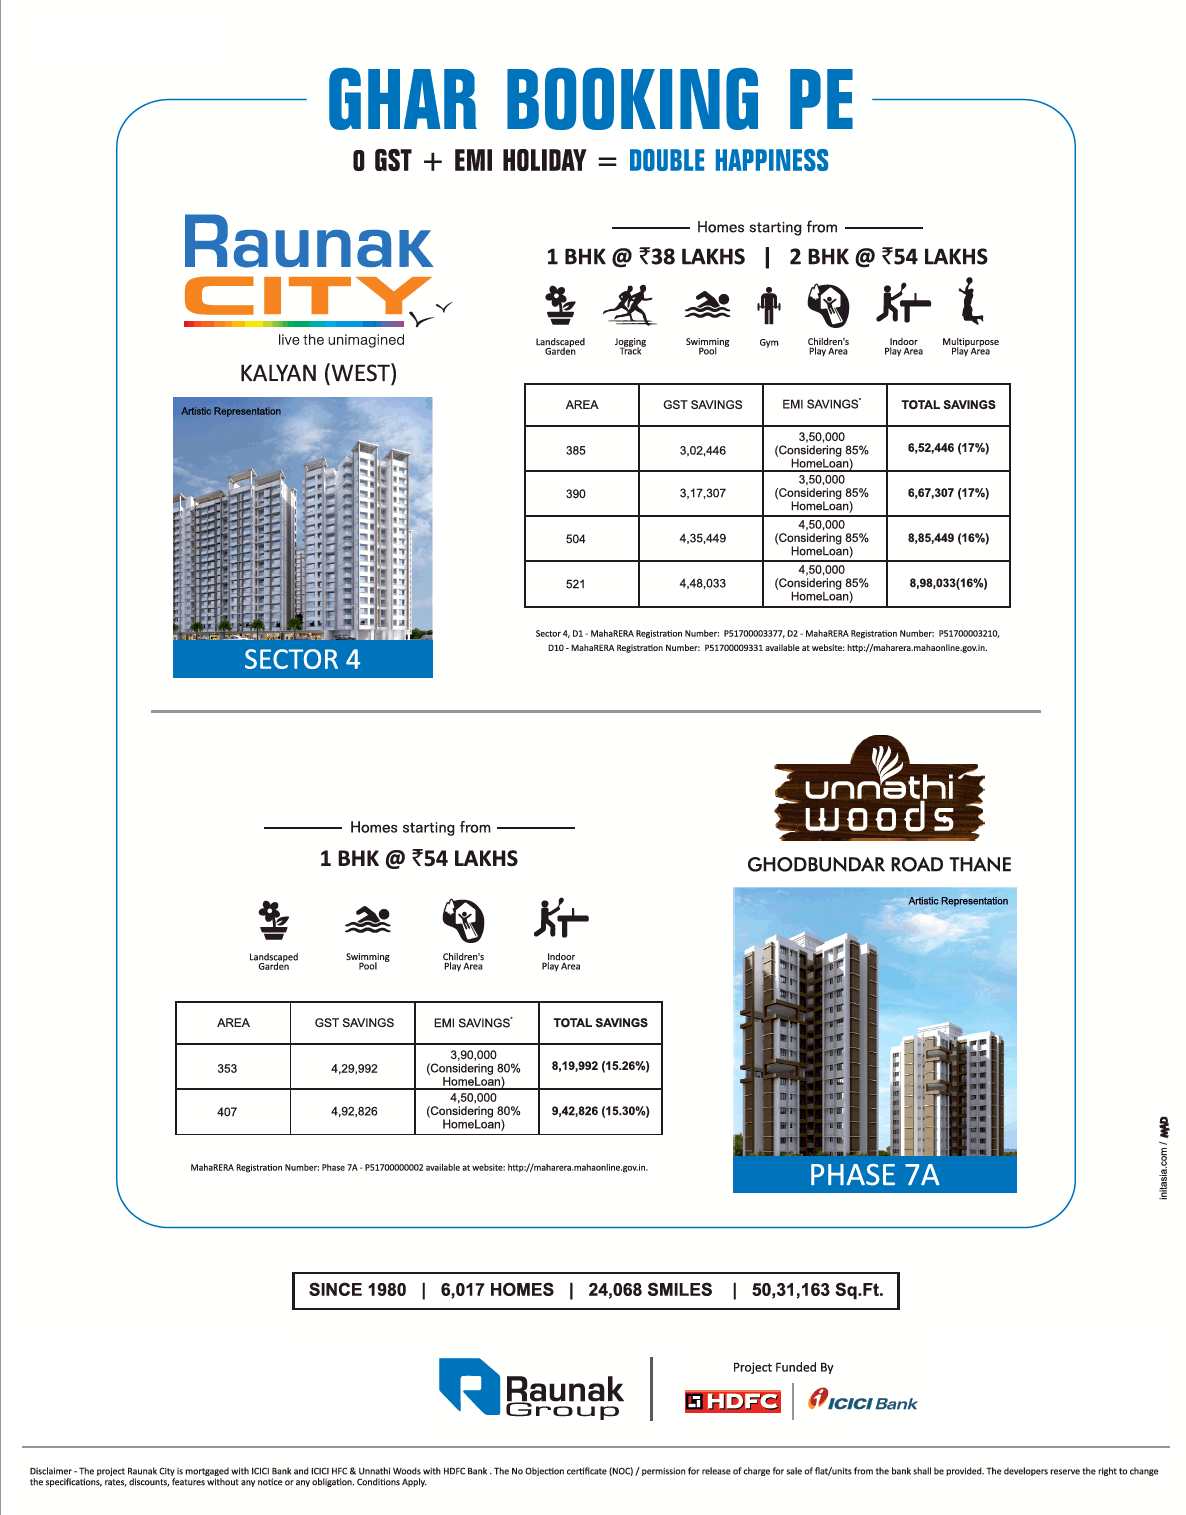 Invest in Raunak Group homes for double happiness in Mumbai